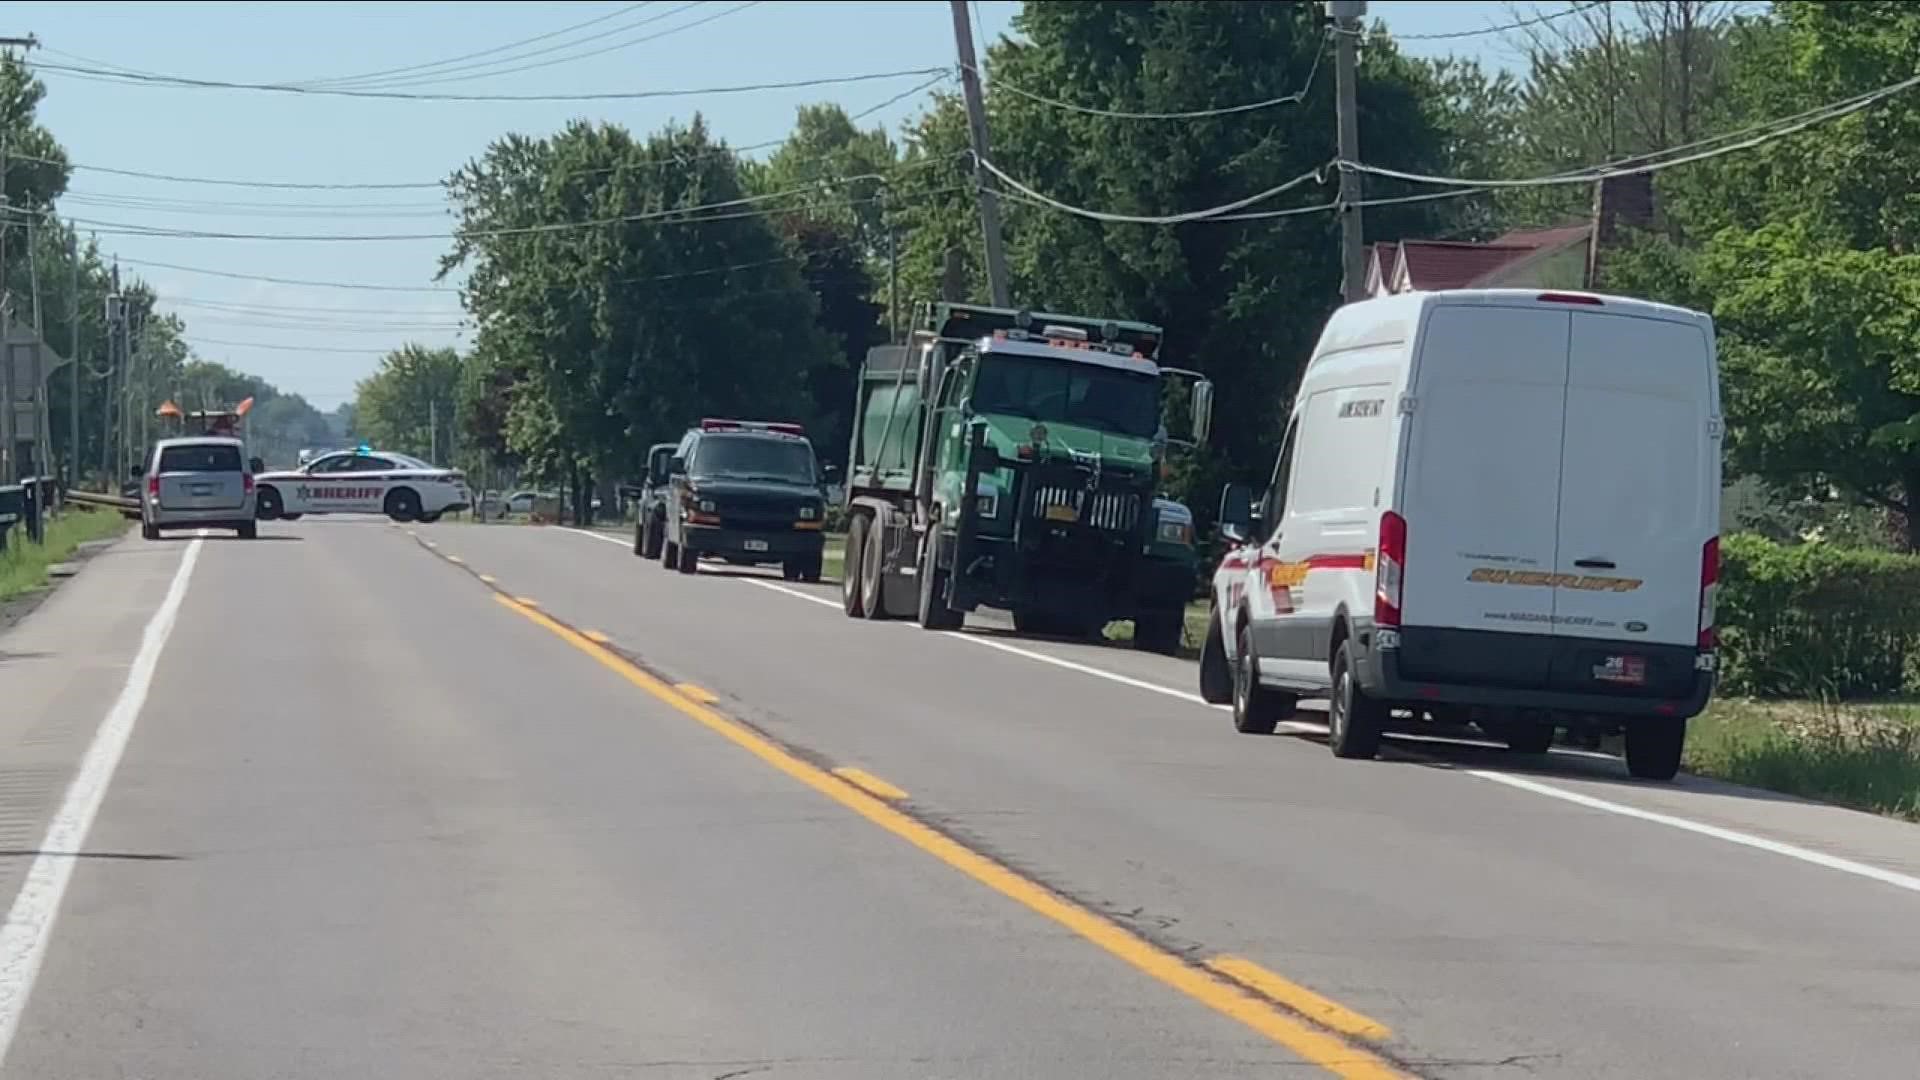 Cyclist dead after crash with dump truck on Shawnee Road in the Town of Wheatfield